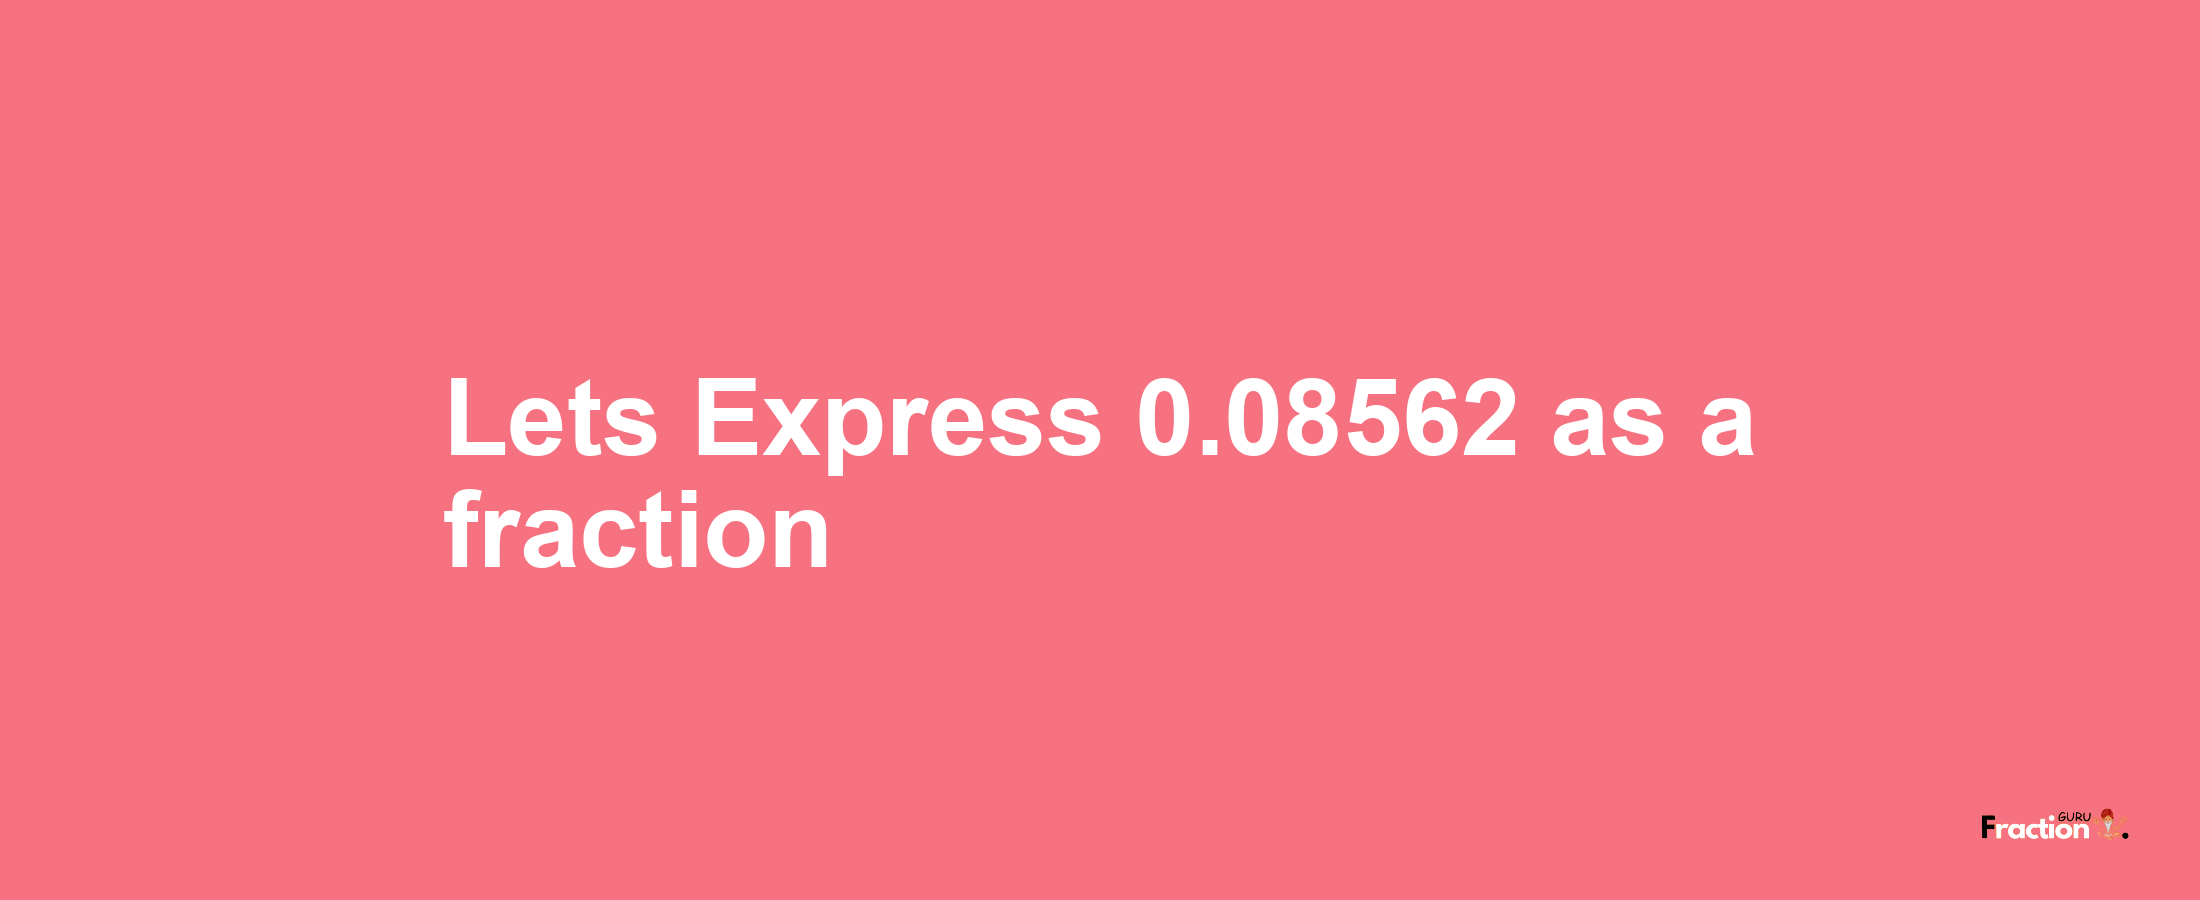 Lets Express 0.08562 as afraction